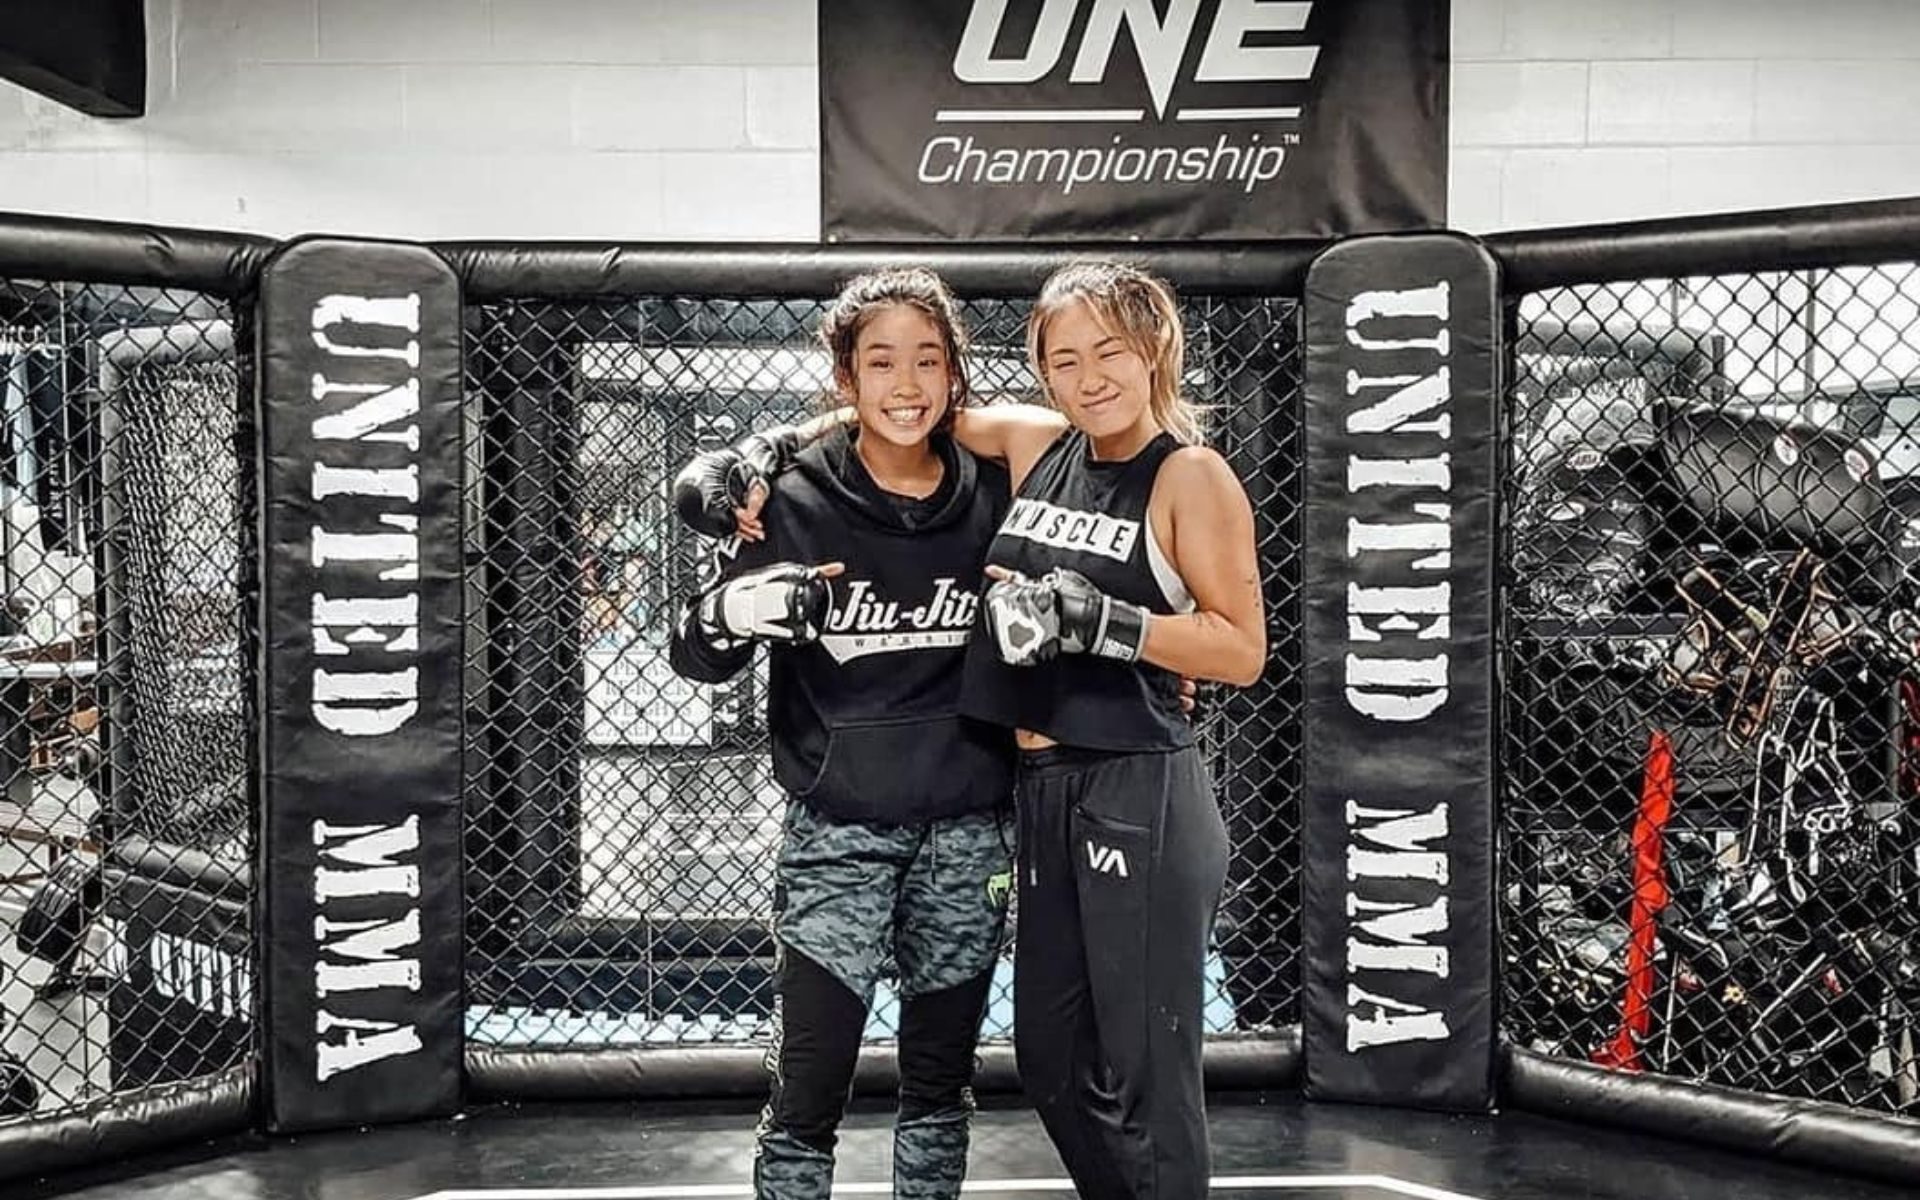 Victoria Lee, sister of ONE Championship stars Angela and Christian, dies  at 18